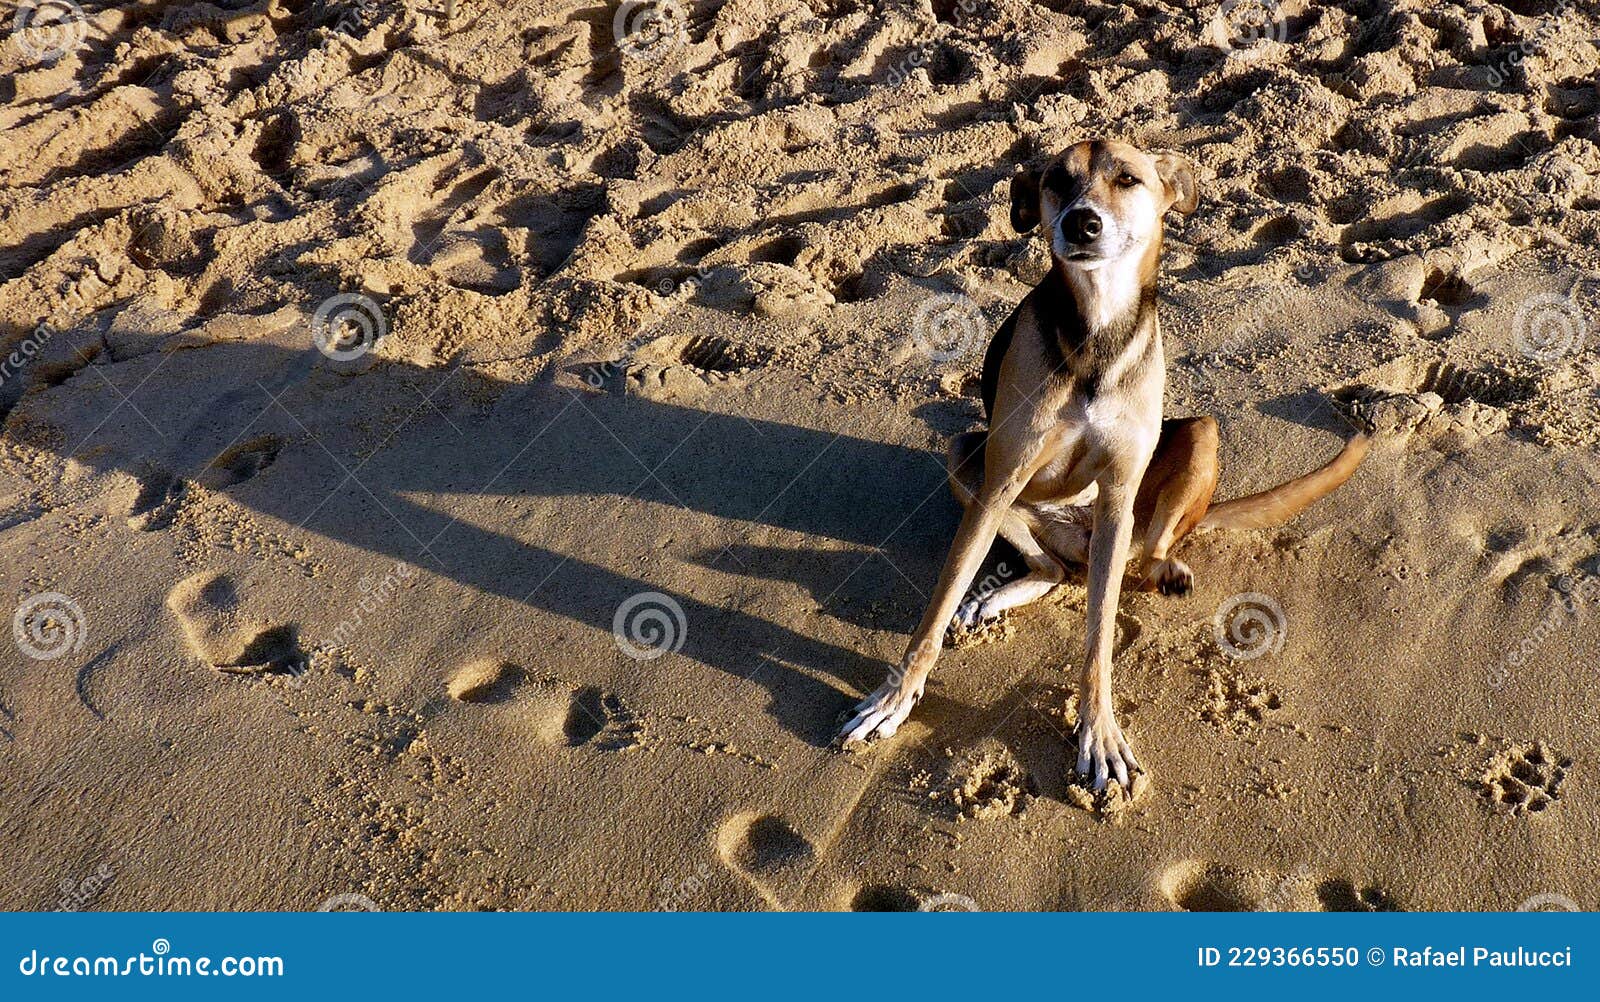 dog sitting on the beach sand with its shadow on the side